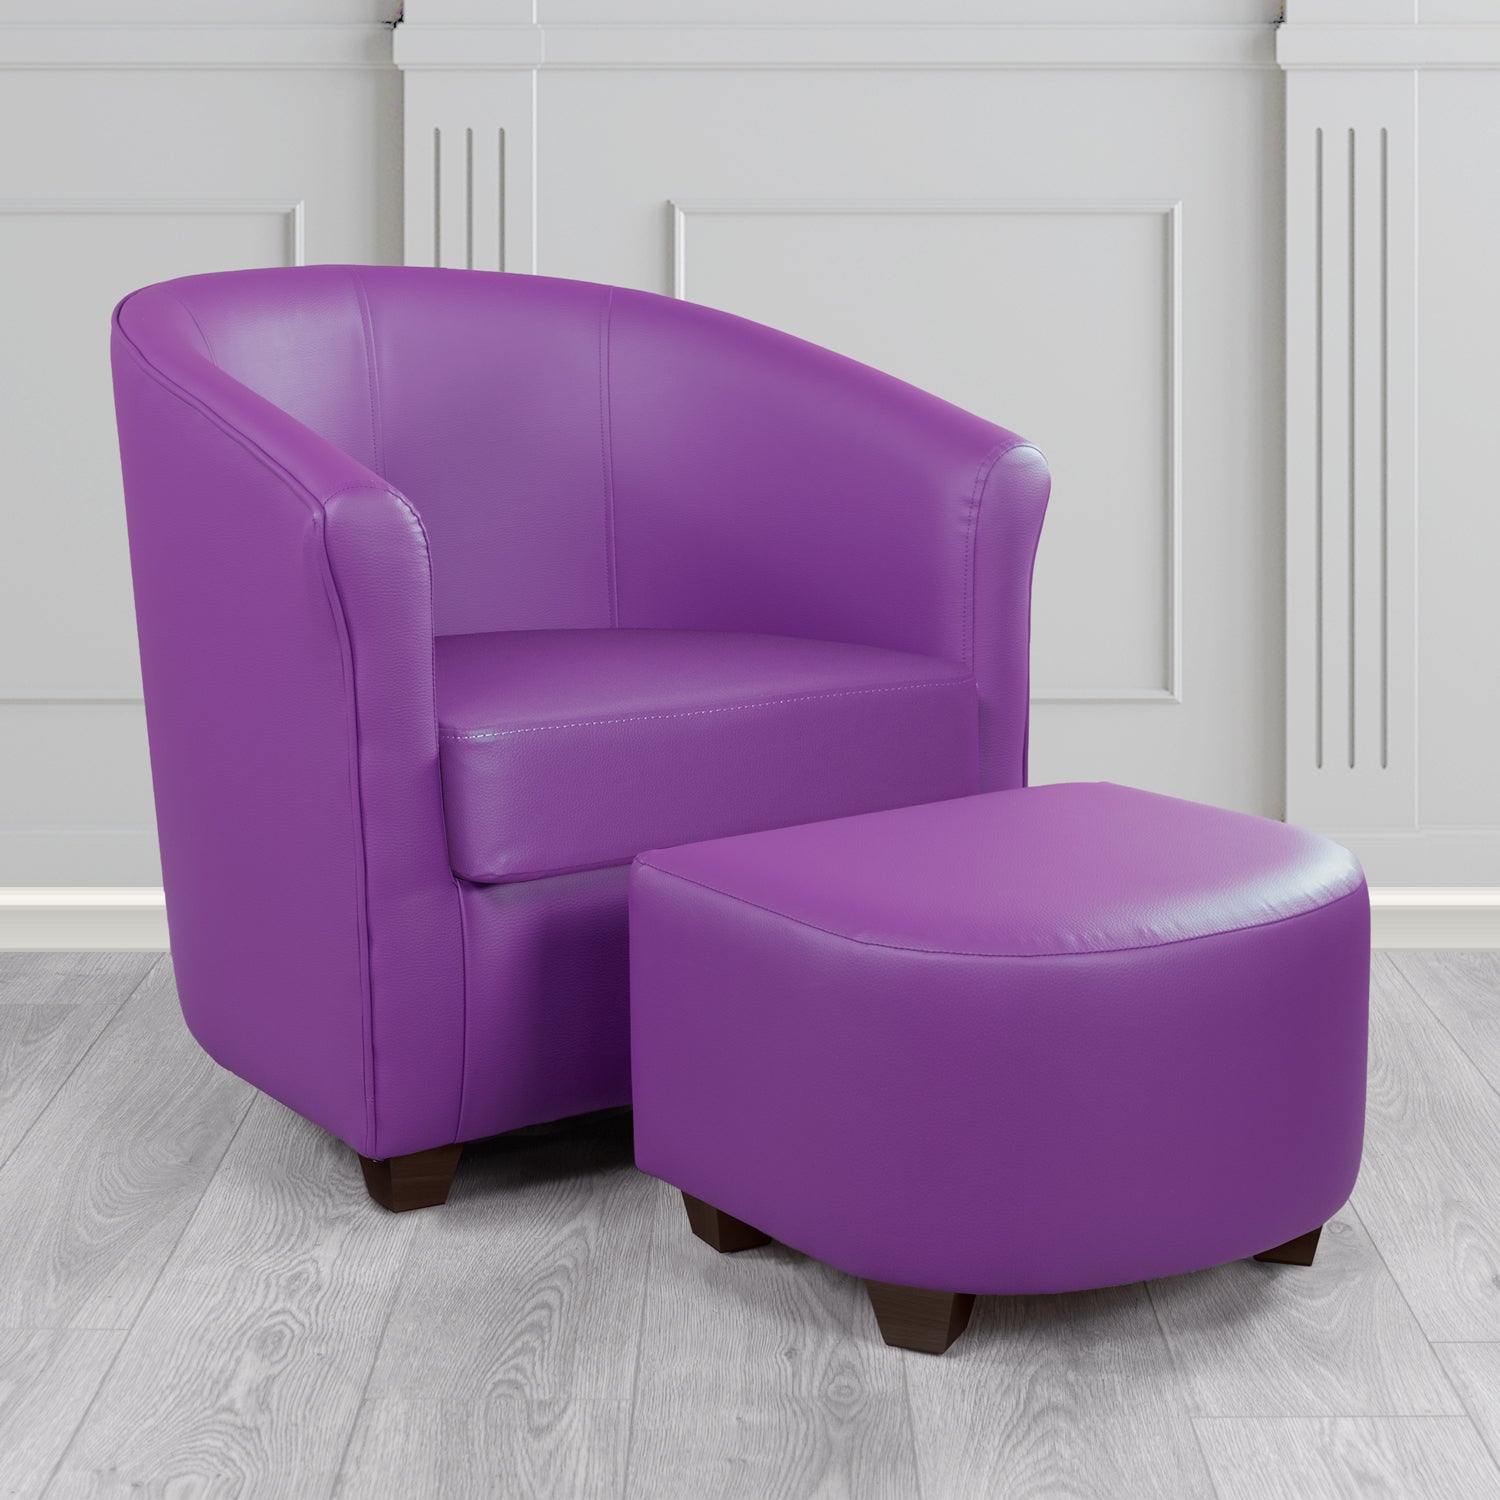 Cannes Tub Chair with Footstool Set in Just Colour Grape Crib 5 Faux Leather - The Tub Chair Shop